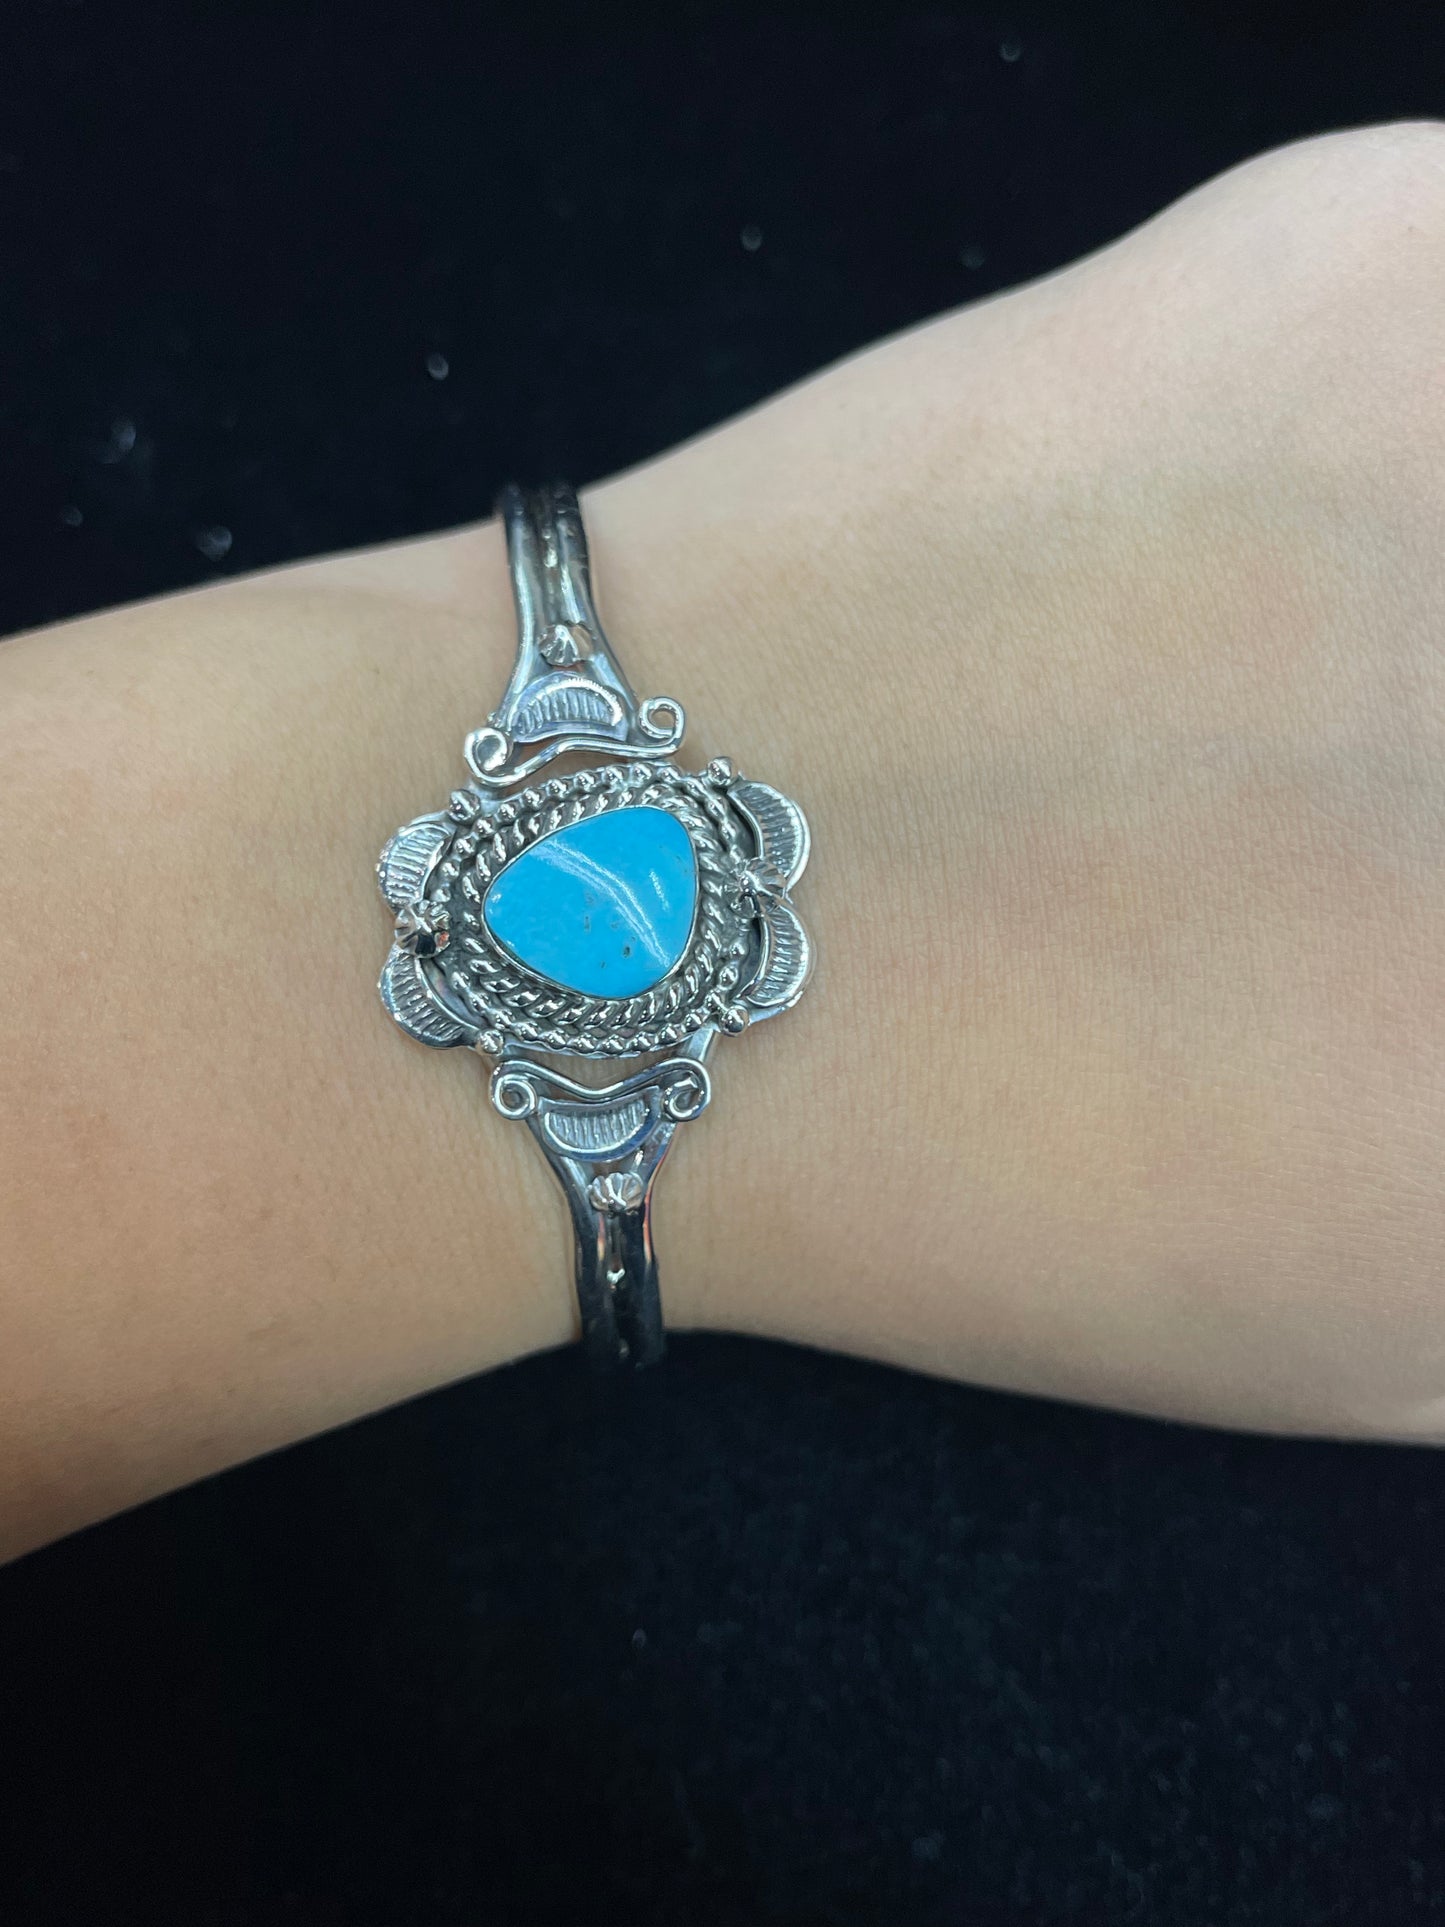 6"-7" Sterling Silver Cuff with Turquoise Stone by Jimmy Garcia, Navajo